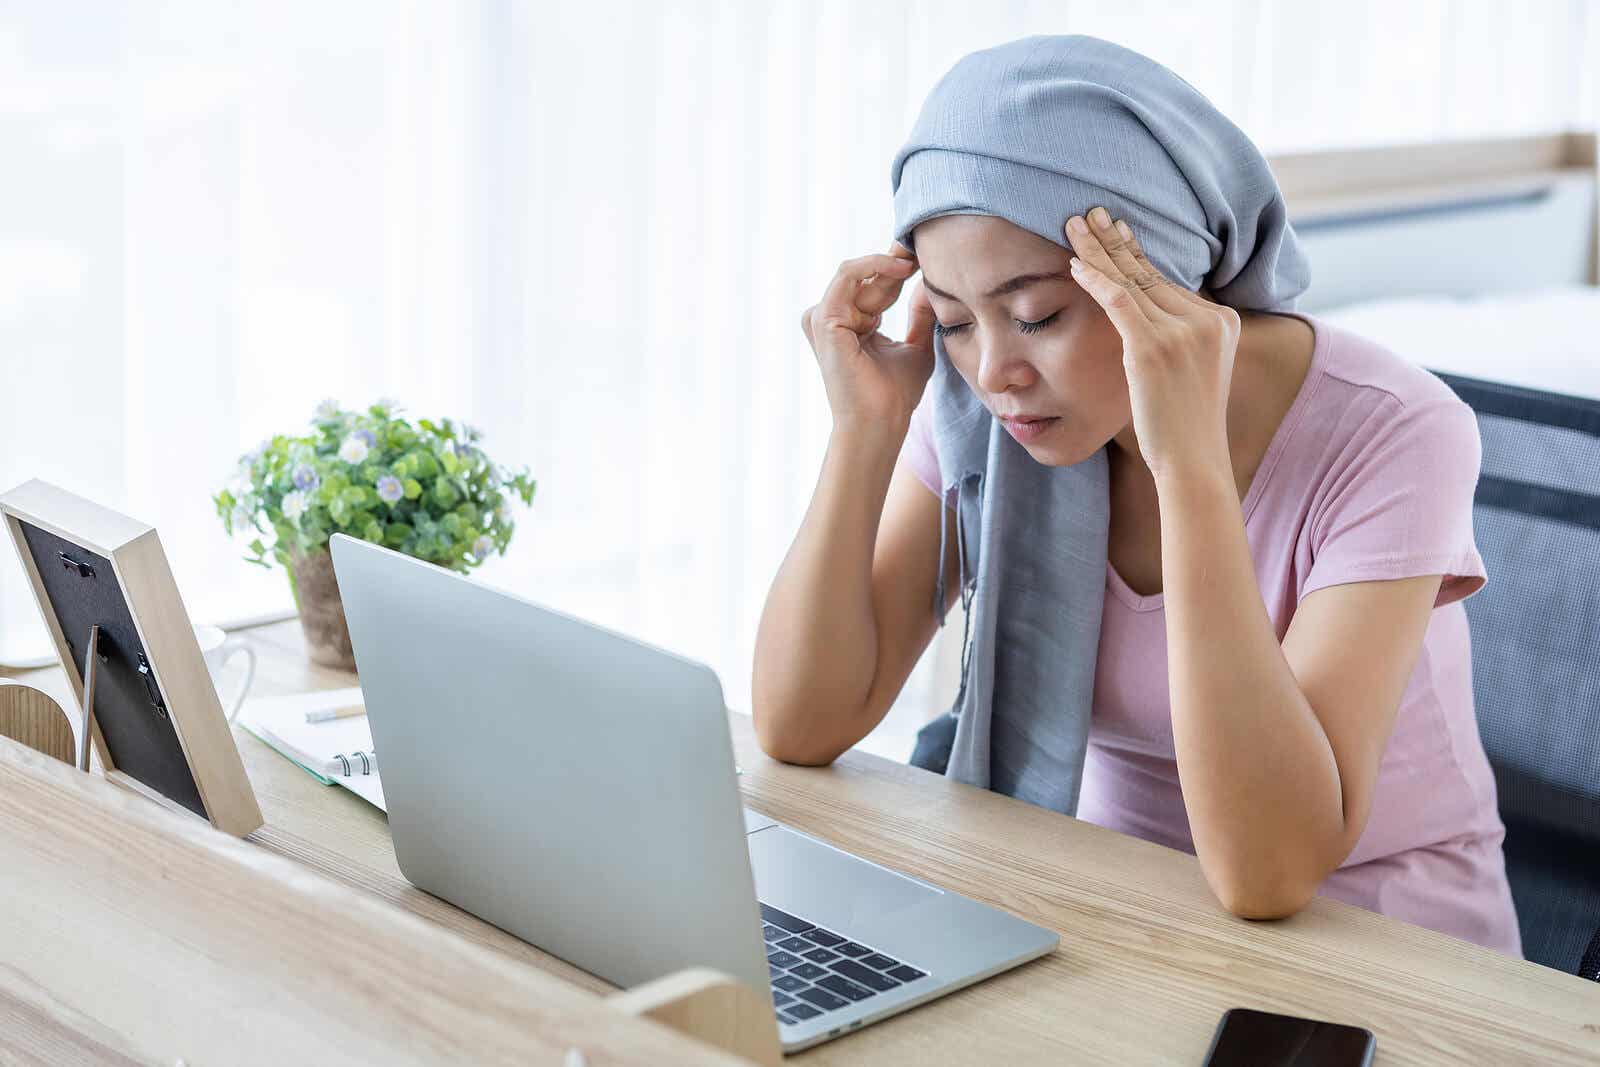 A woman sitting at her laptop with a scarf around her head, rubbing her temples.